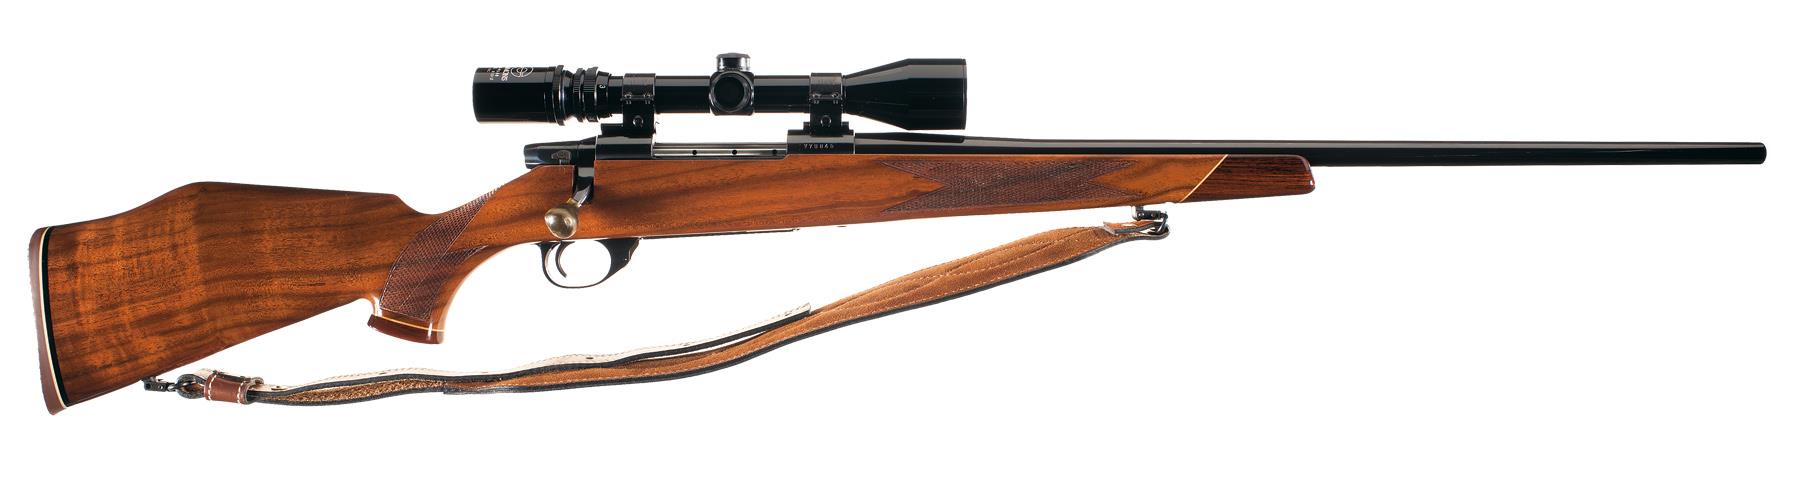 Weatherby rifle serial number search